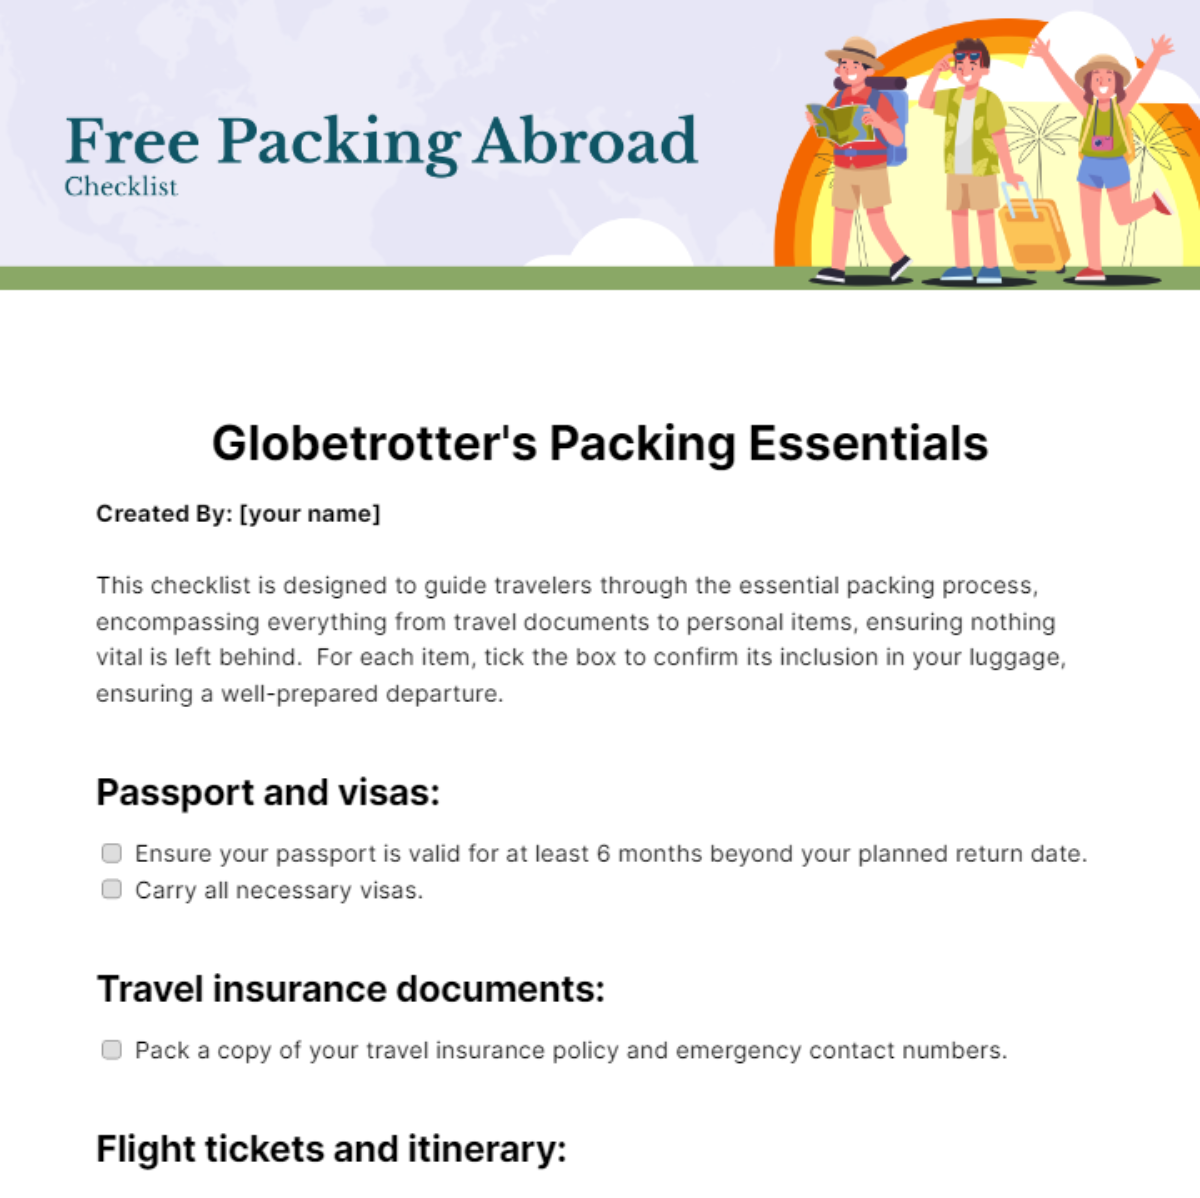 Packing Abroad Checklist Template